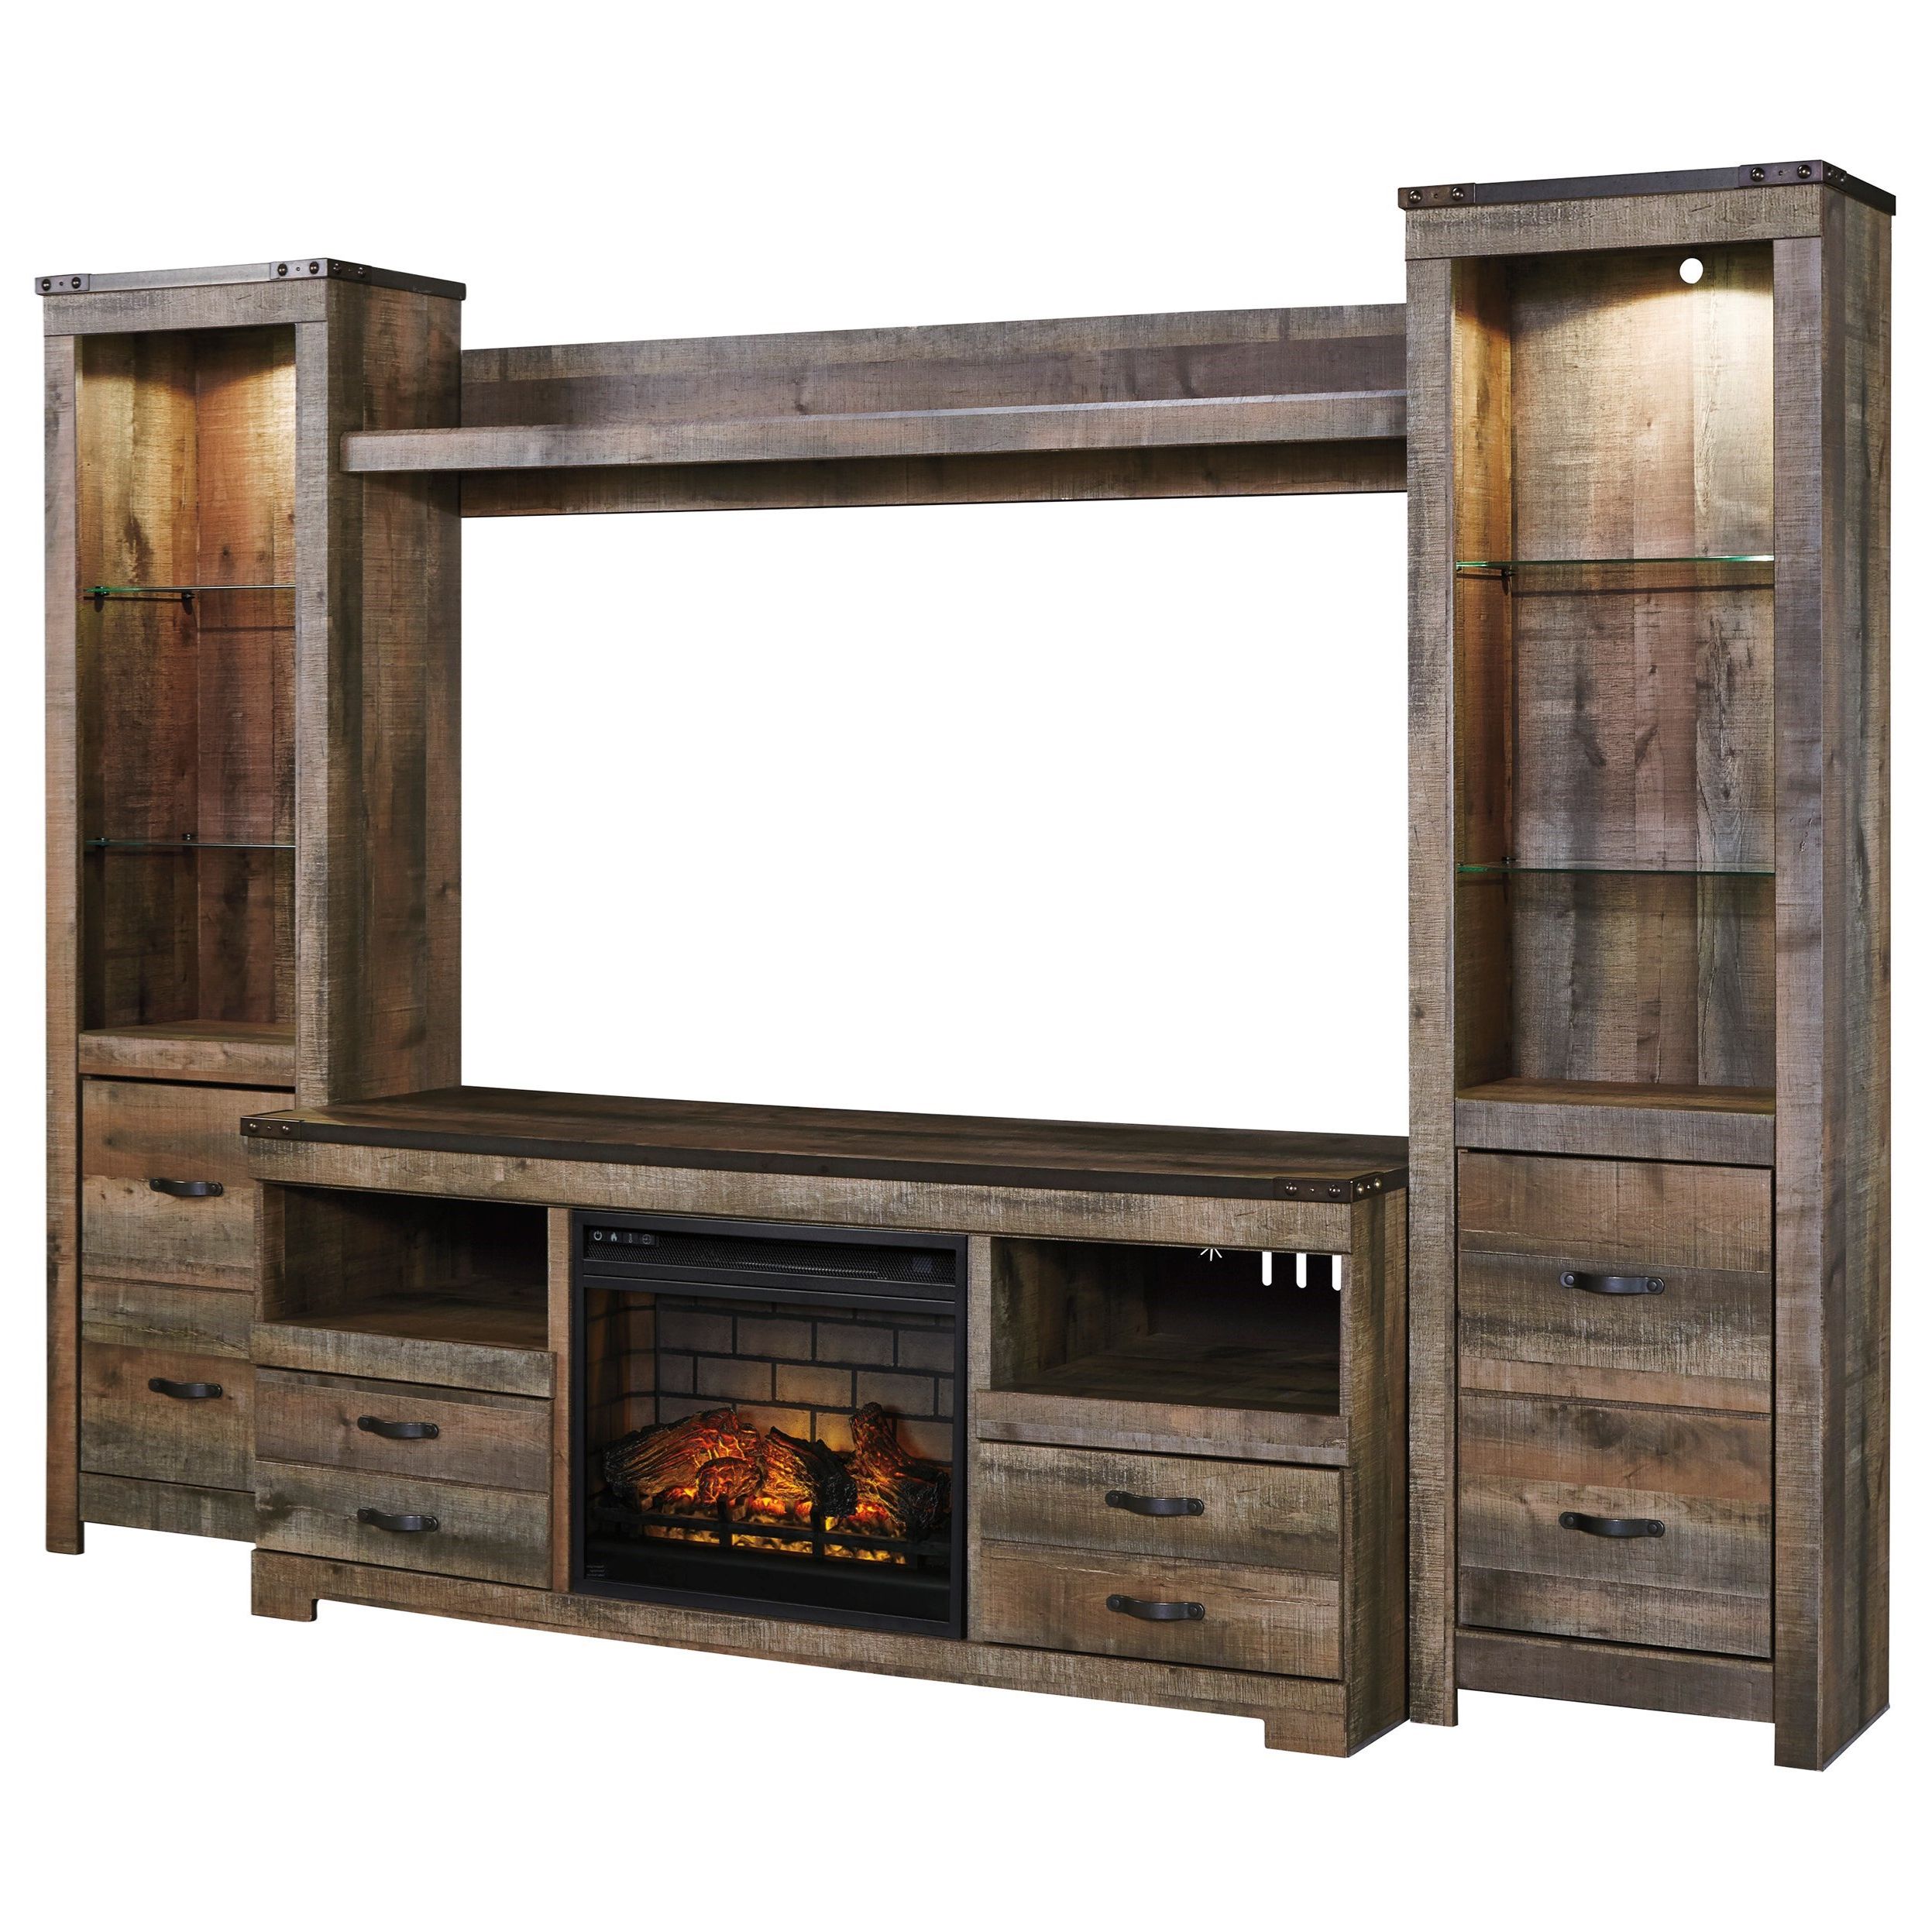 Signature Designashley Trinell W446w8 Rustic Large Tv Stand W/  Fireplace Insert, 2 Tall Piers, & Bridge | Factory Direct Furniture | Wall  Units Within Entertainment Units With Bridge (Gallery 2 of 20)